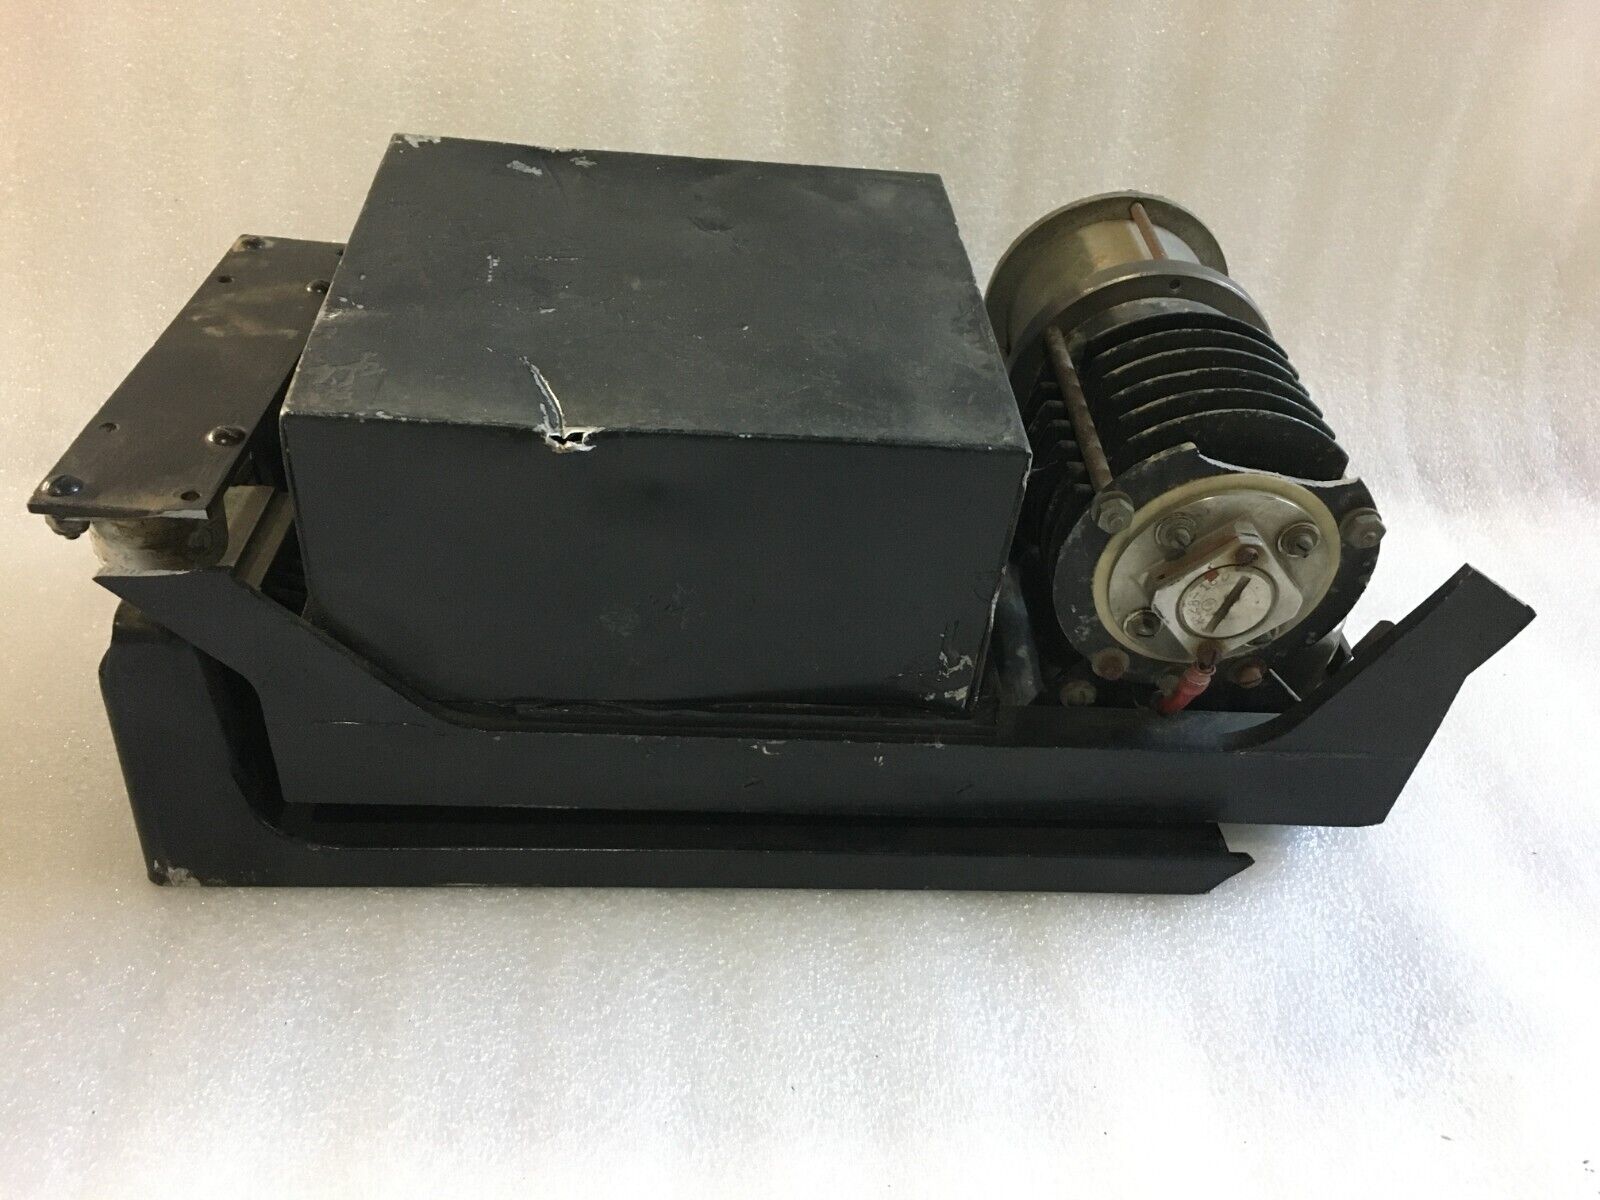 Generator Supply Box Assembly with Voltage regulator E1597-1 As Removed